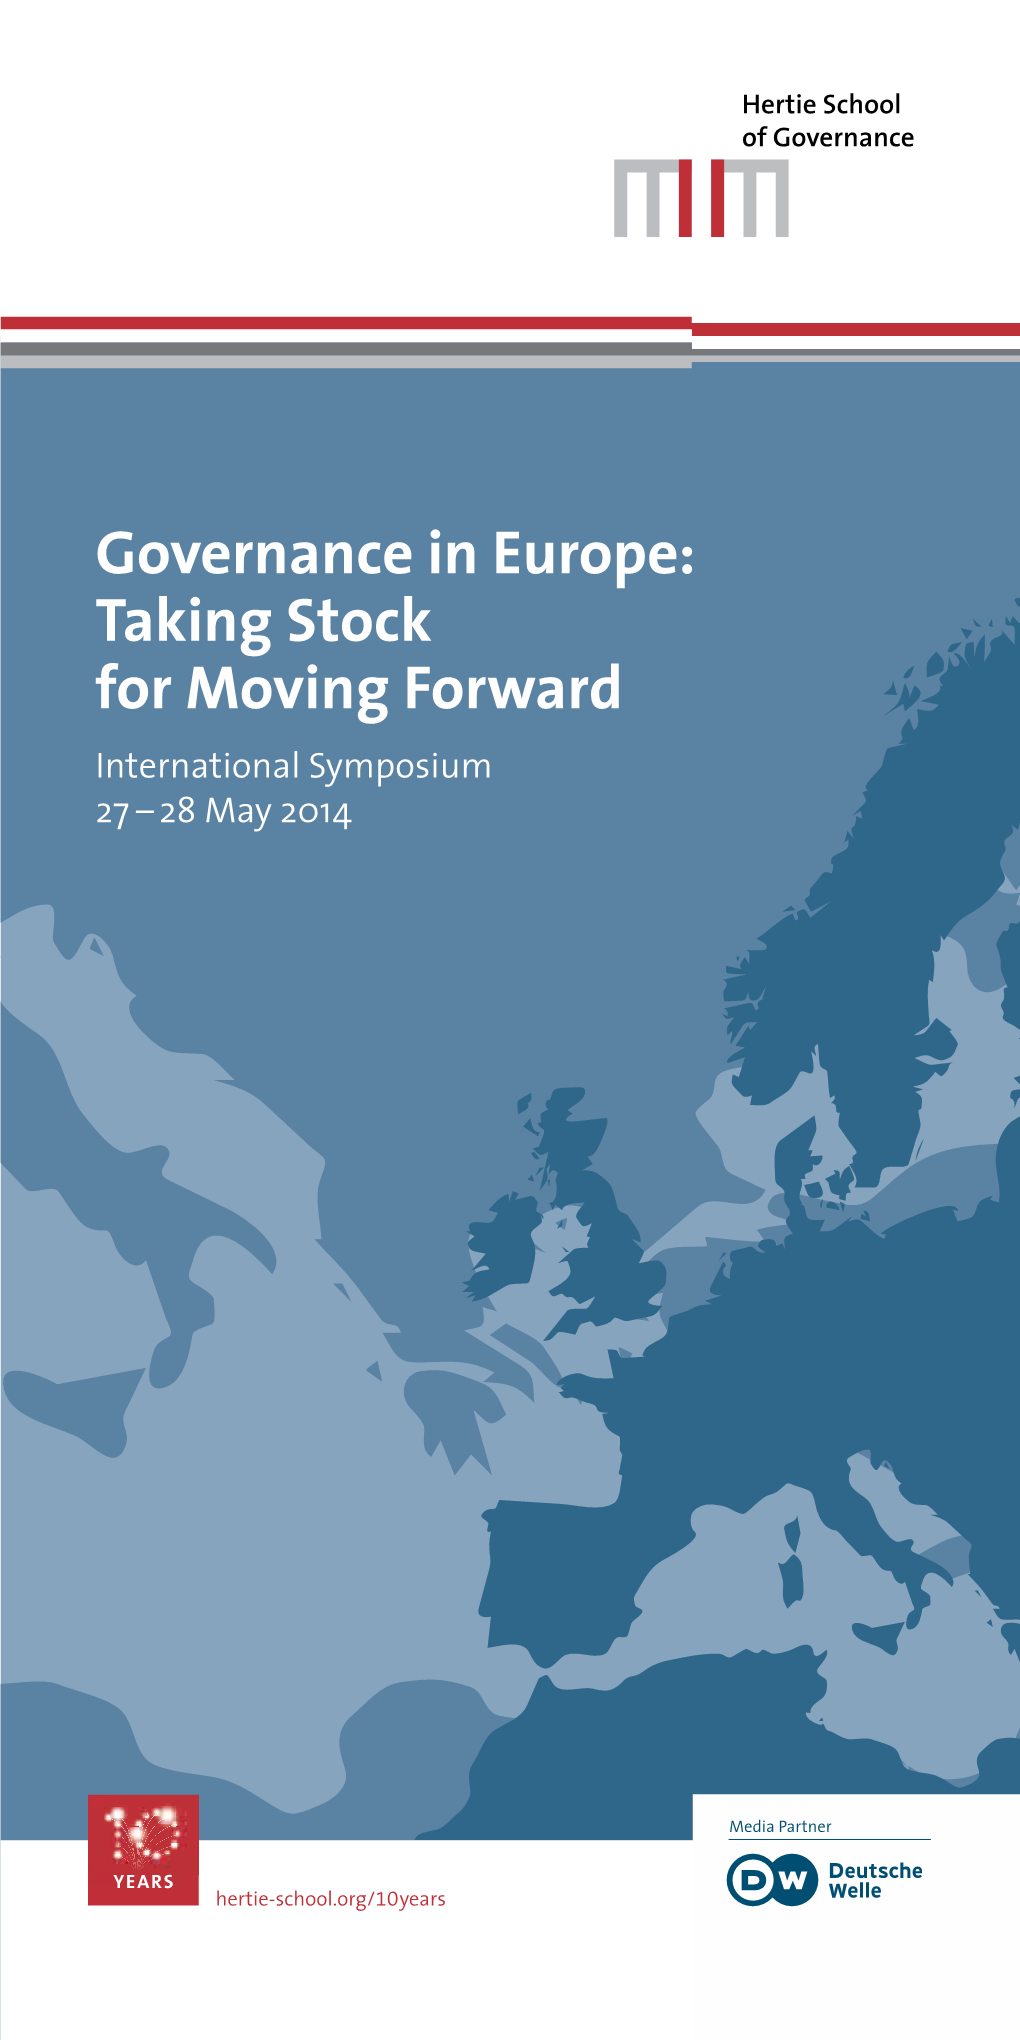 Governance in Europe: Taking Stock for Moving Forward International Symposium 27 – 28 May 2014